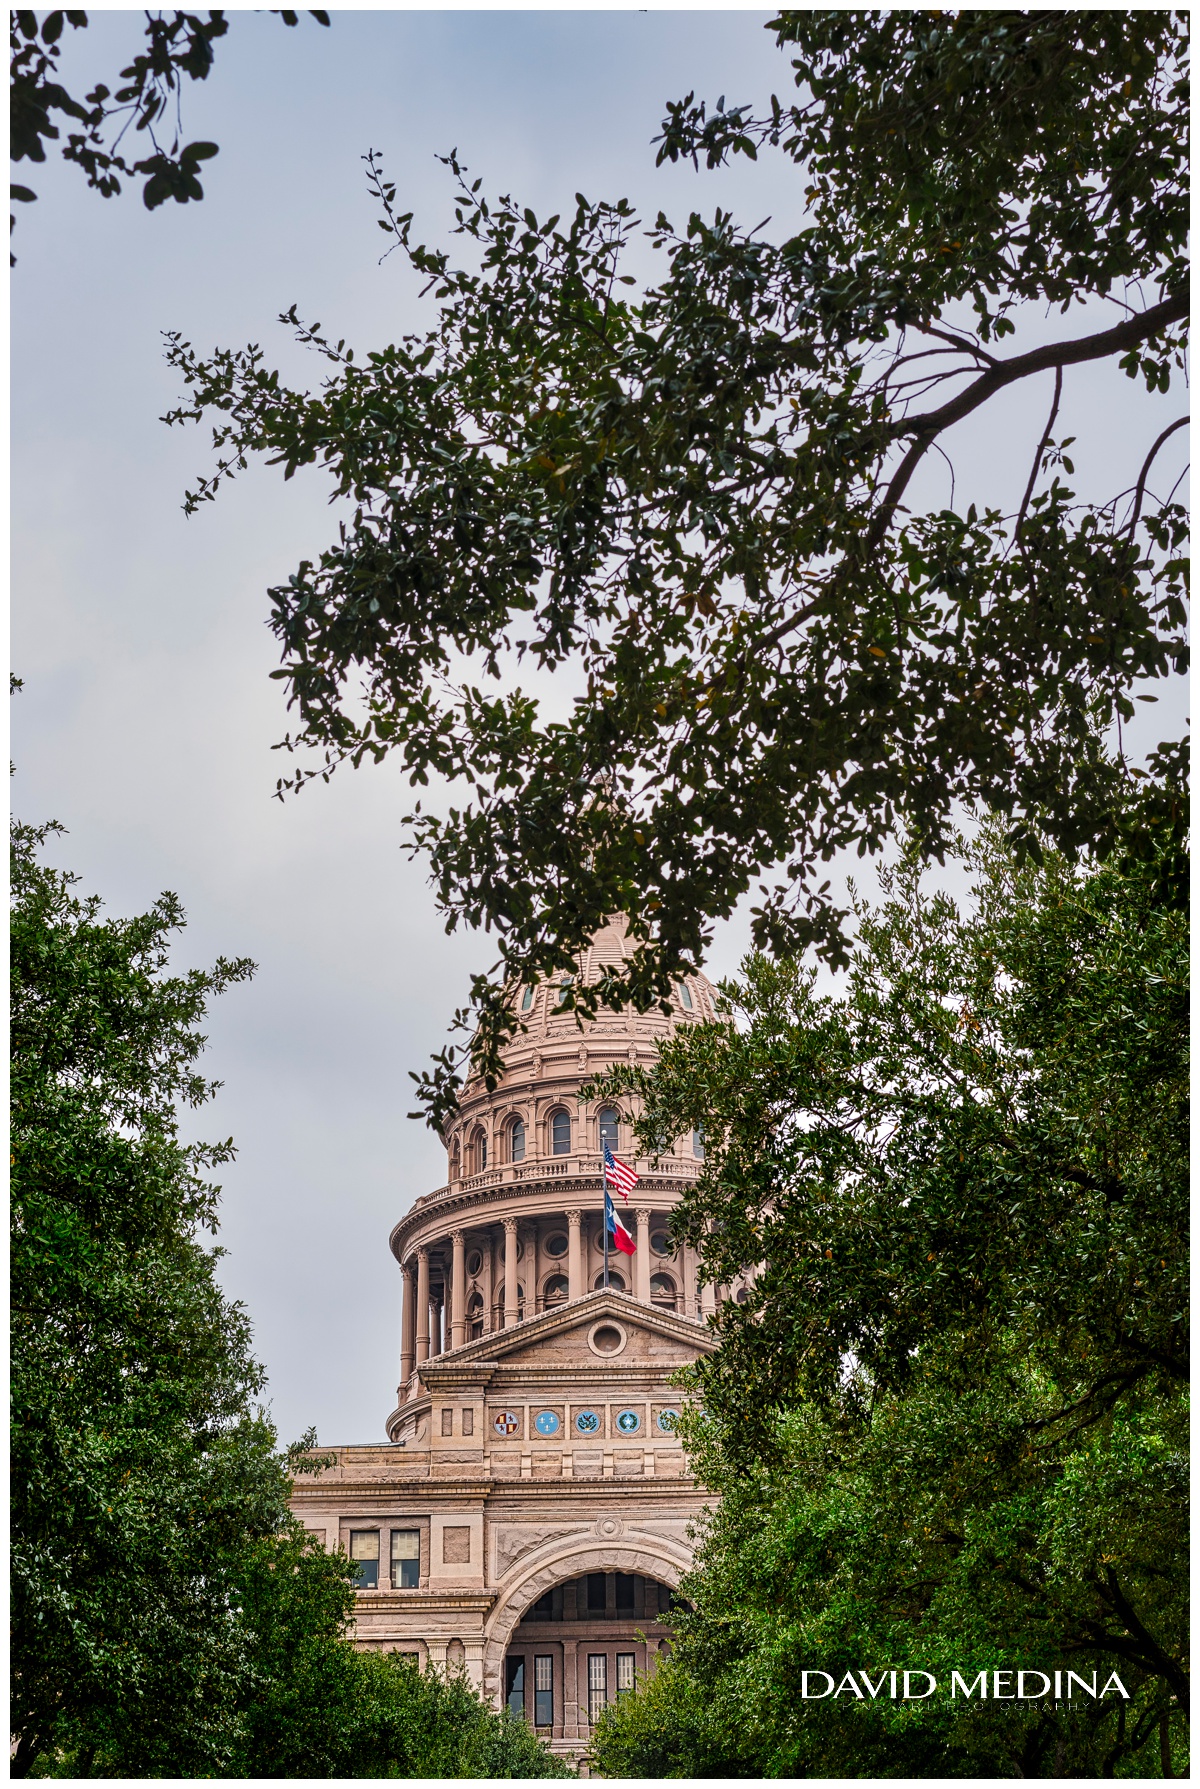 View of Texas State Capitol